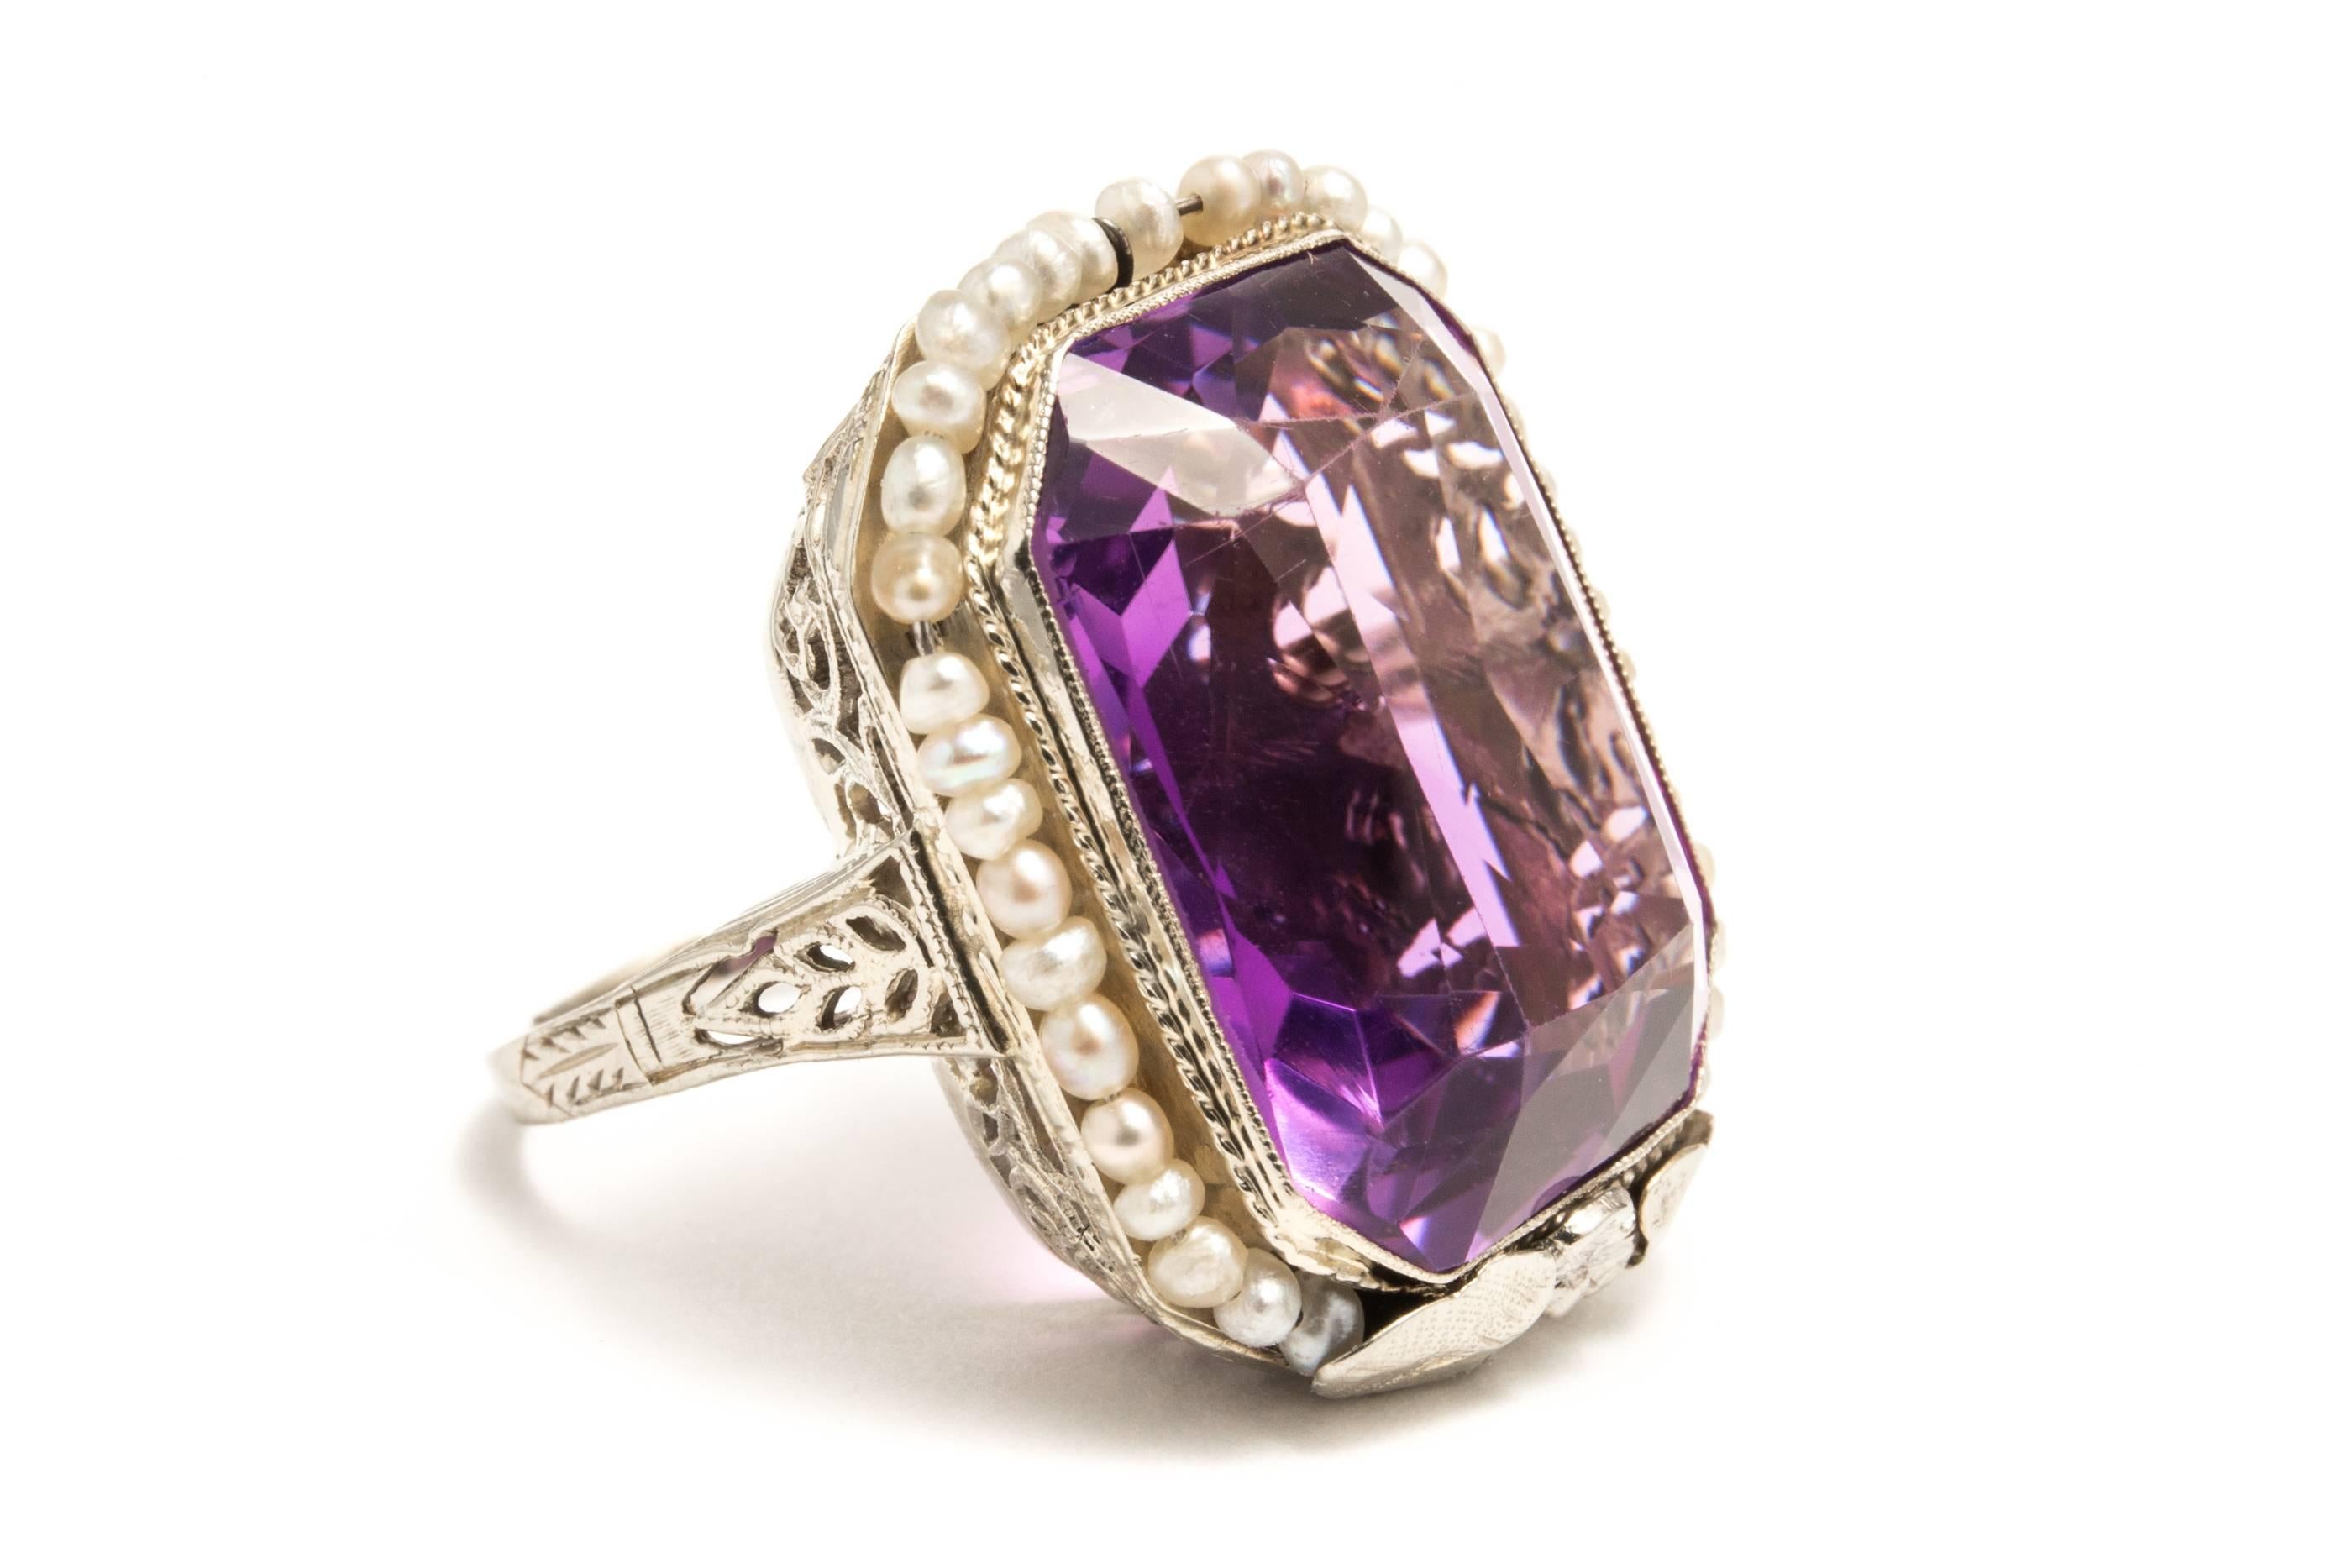 A beautiful original art deco period amethyst and pearl ring in 18 karat white gold.  Centered by a beautiful rectangular shaped amethyst, this ring features a halo of seed pearls surrounding the amethyst.

Weighing approximately 21 carats by